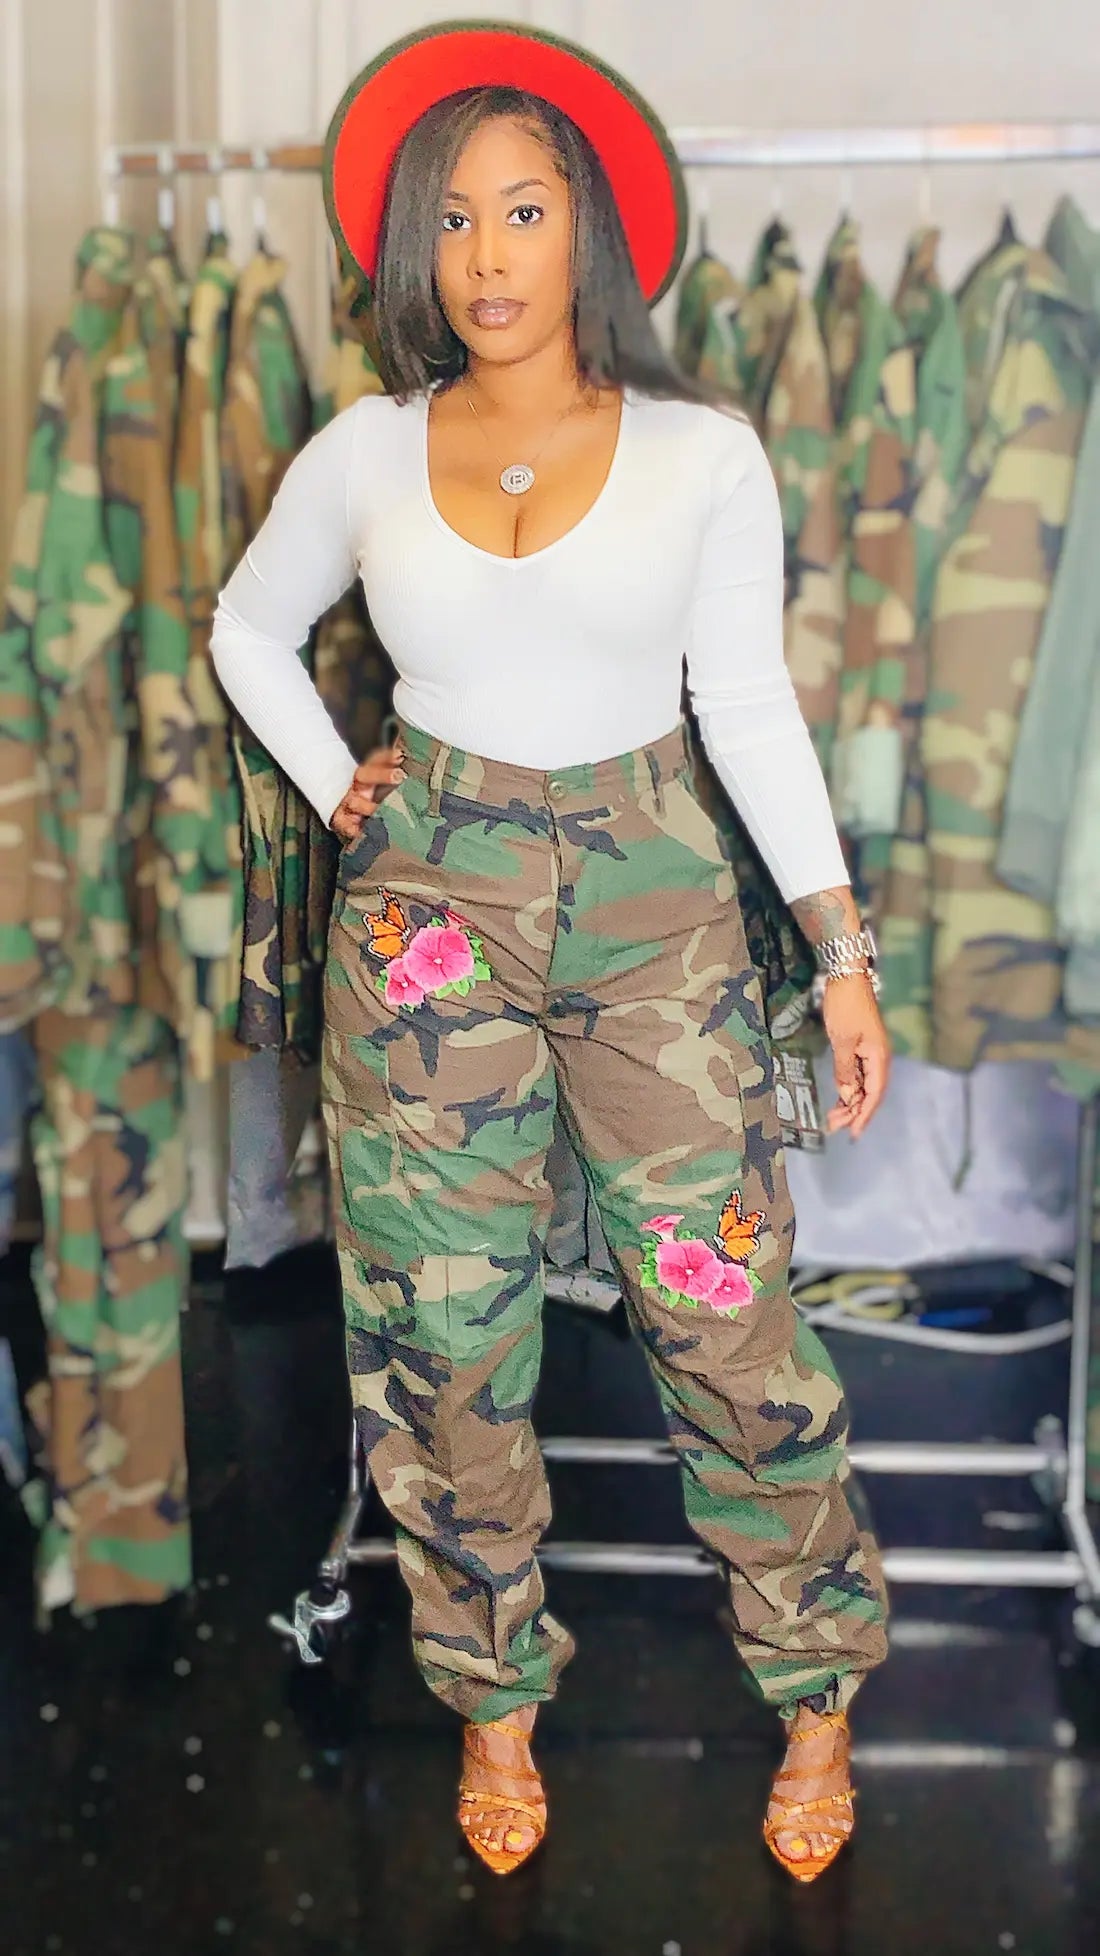 Curvyfab Top and Pants 2 Piece Set Black/Camouflage Print Curvyfab Couture  | South Africa | Zando